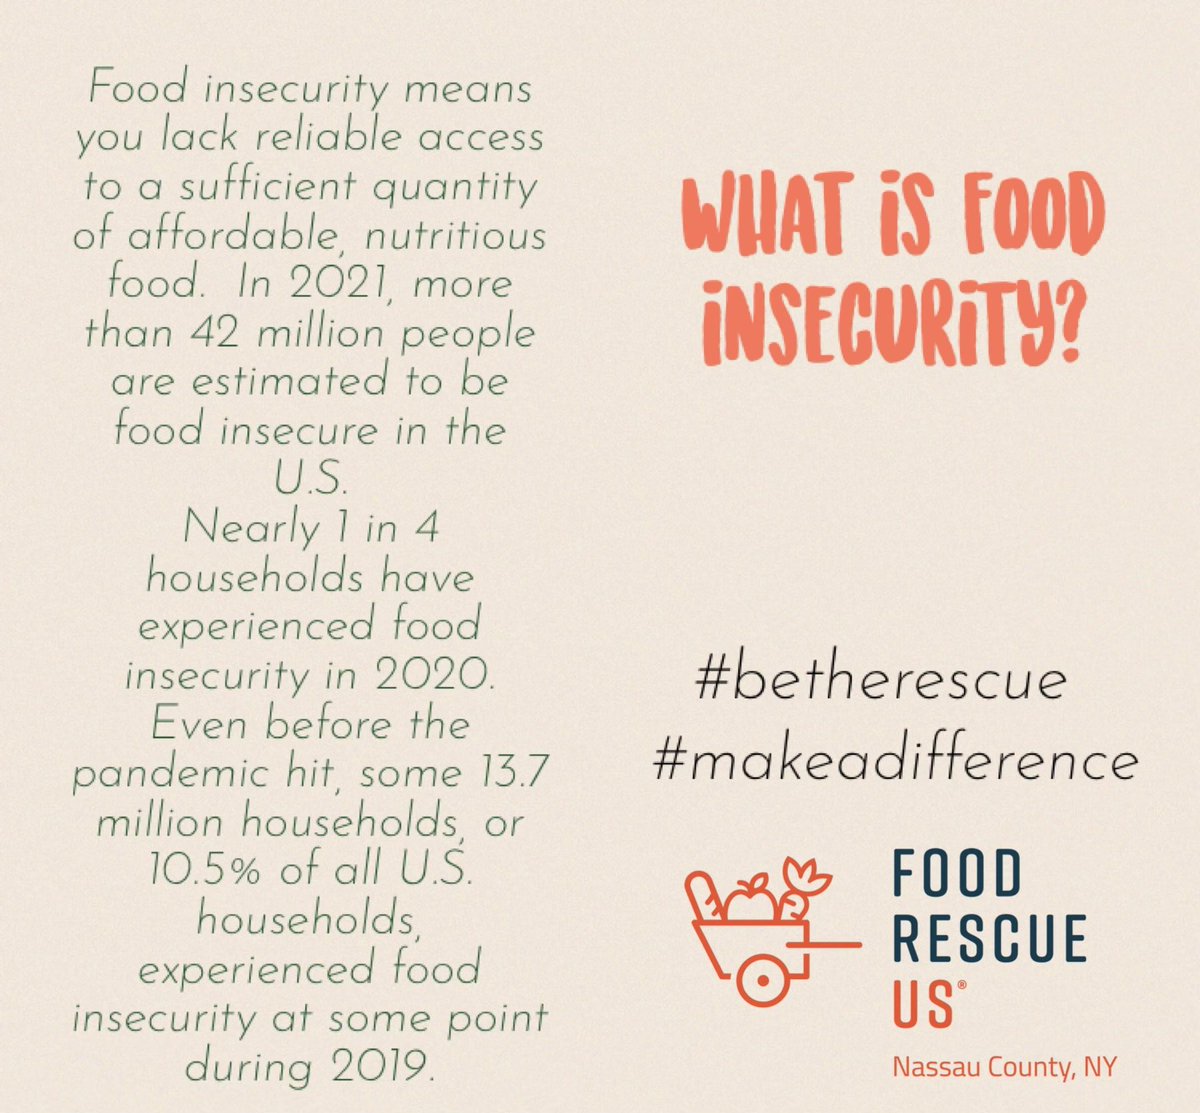 Food Fact Friday #foodwasteawareness #betherescue #foodrescue